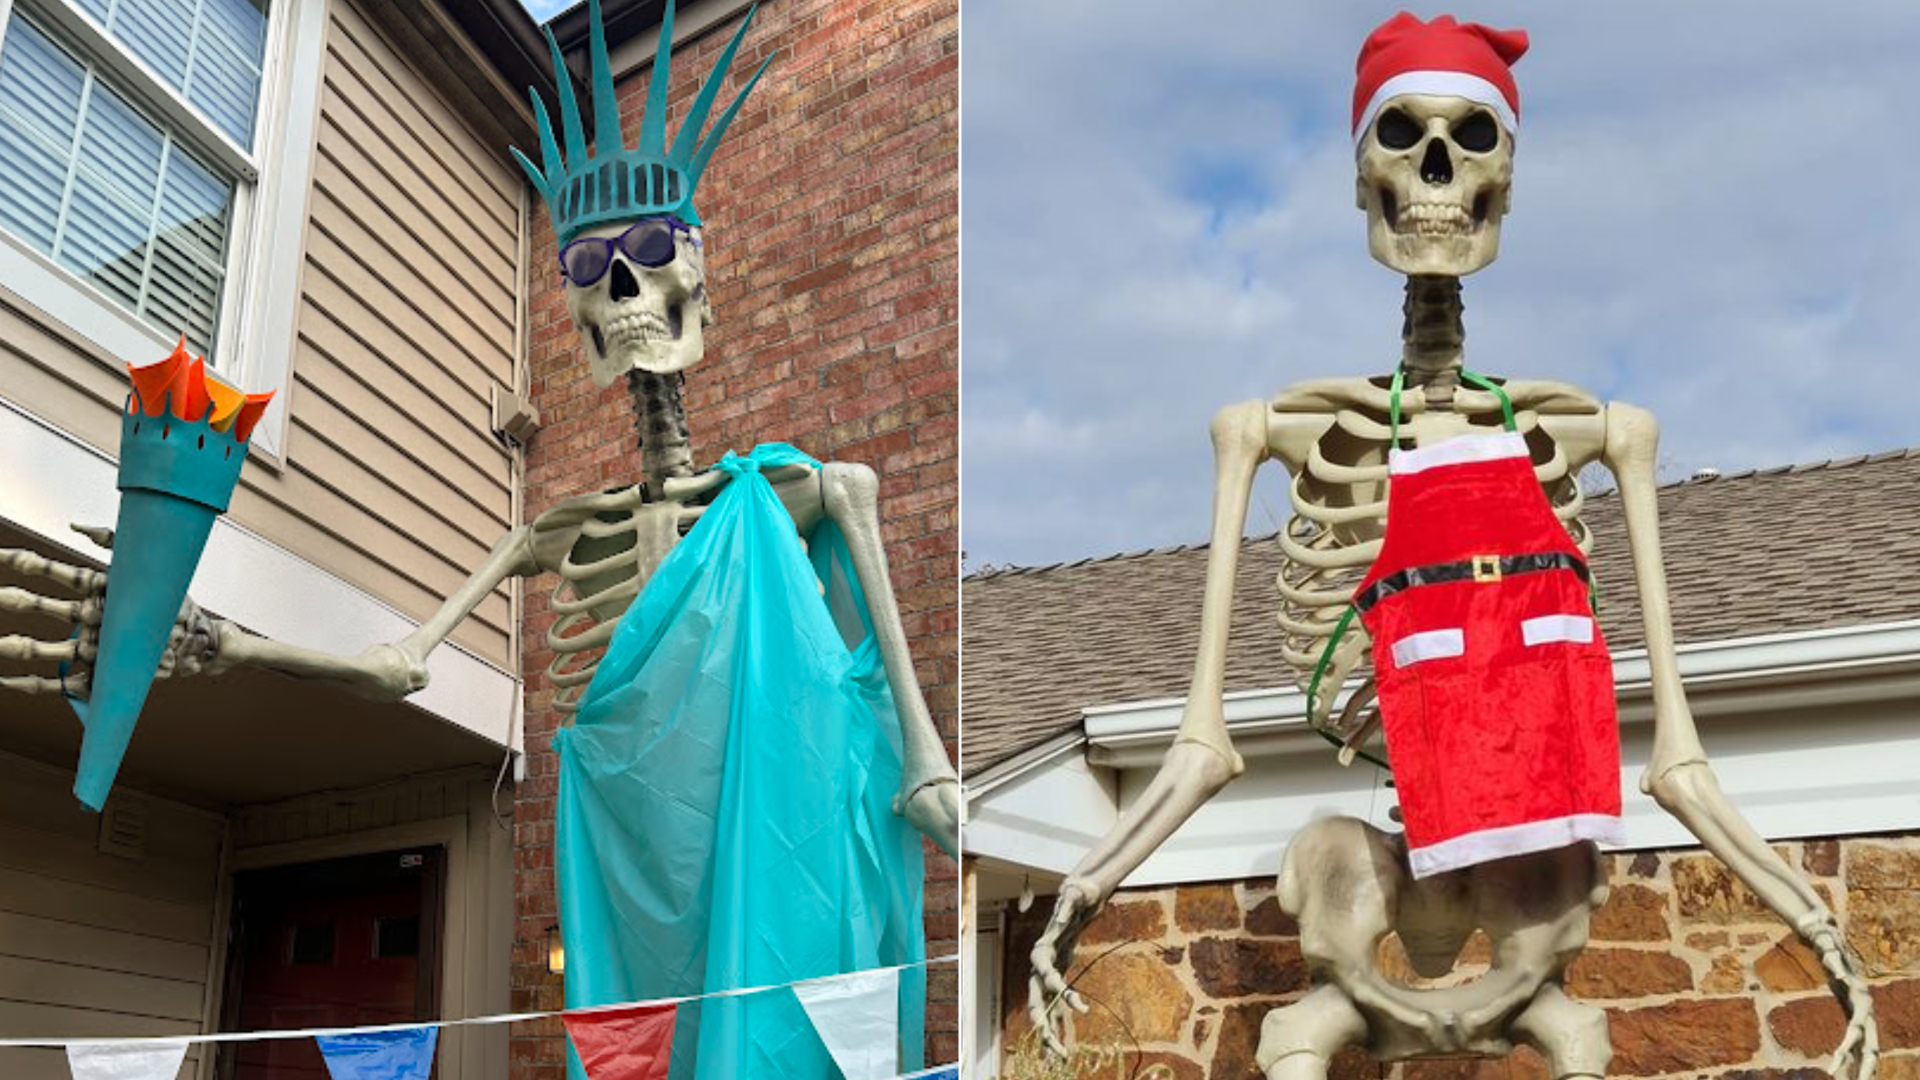  A growing number of skeleton owners are keeping the decorations up year-round with seasonal wardrobe changes. Photos: Courtesy of Katie Shealy (left) and Samantha Reynolds (right)